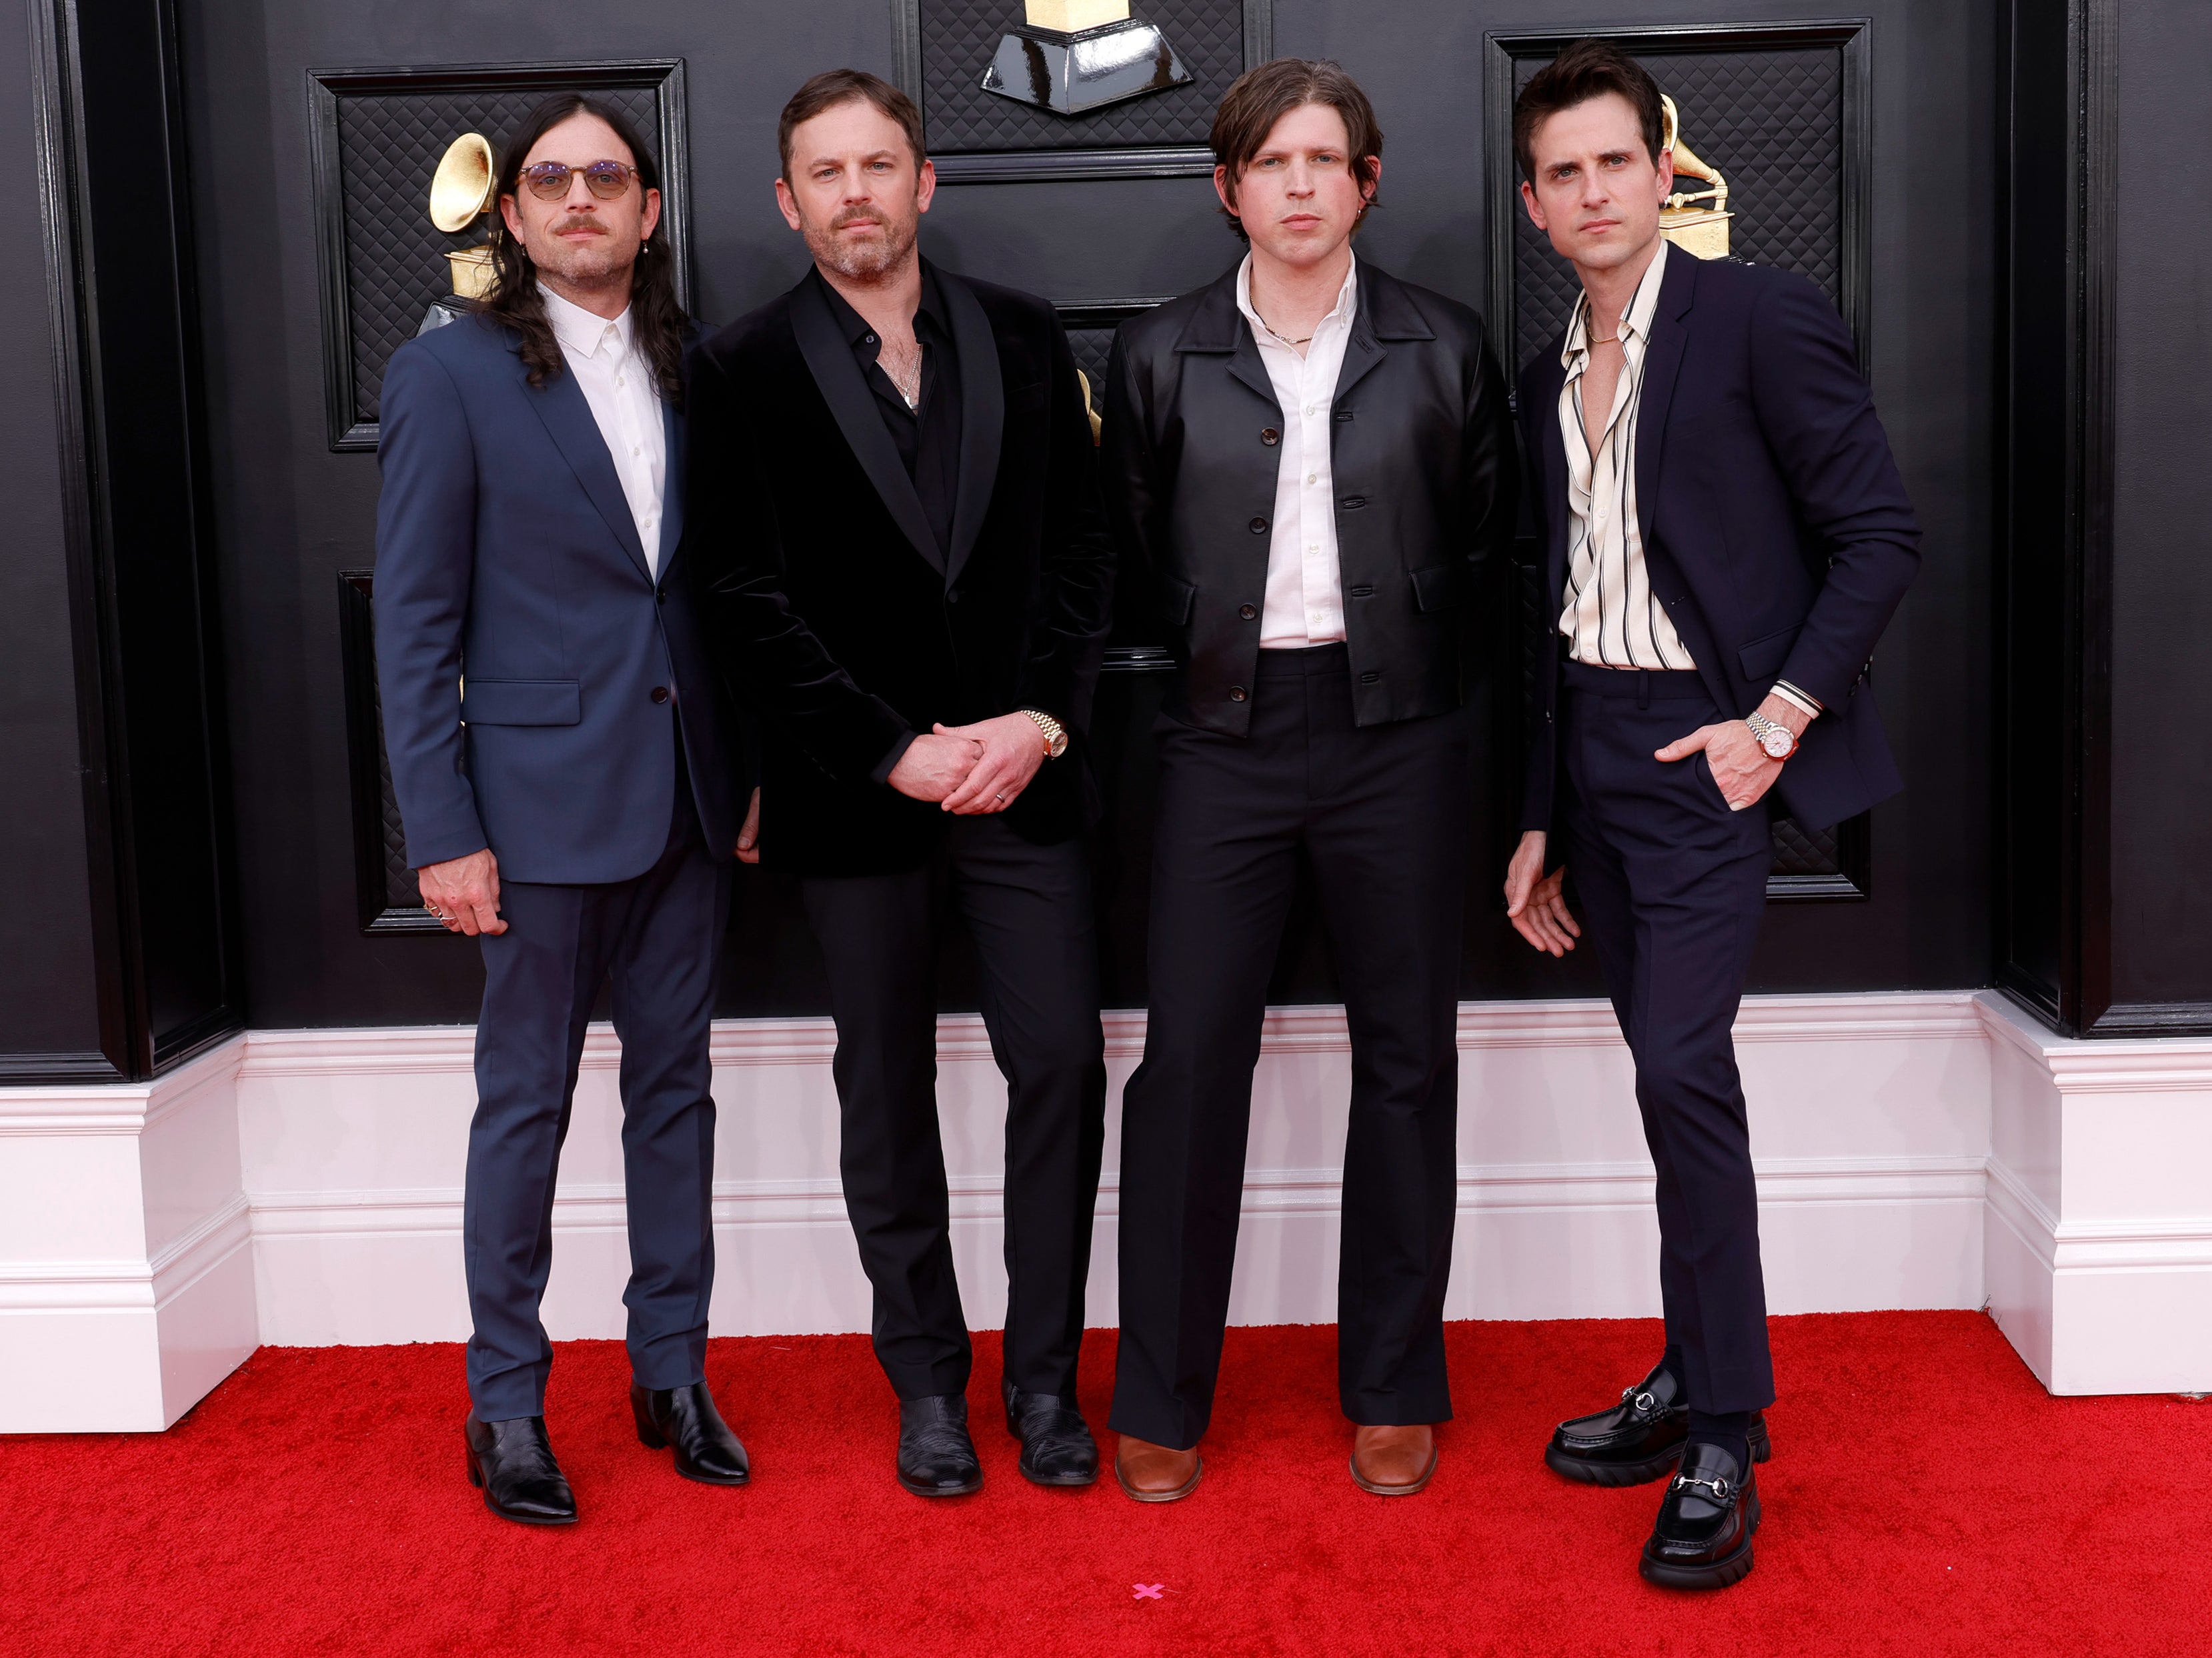 ‘It took us a while to get here’: Kings of Leon at the Grammys in 2022